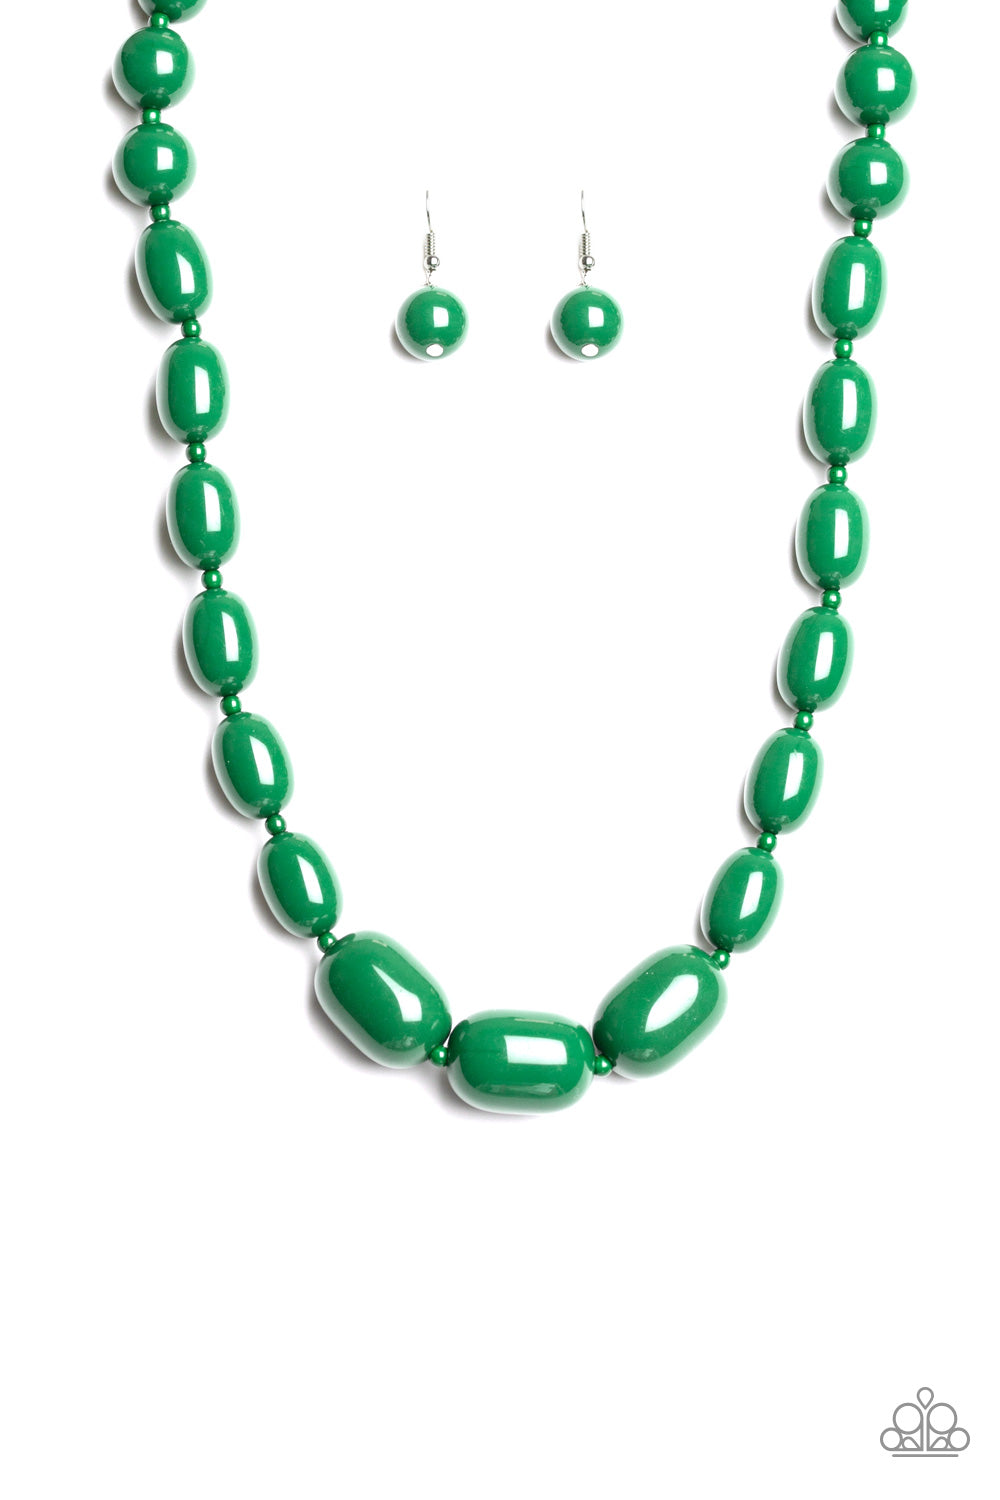 Poppin' Popularity Green Necklace